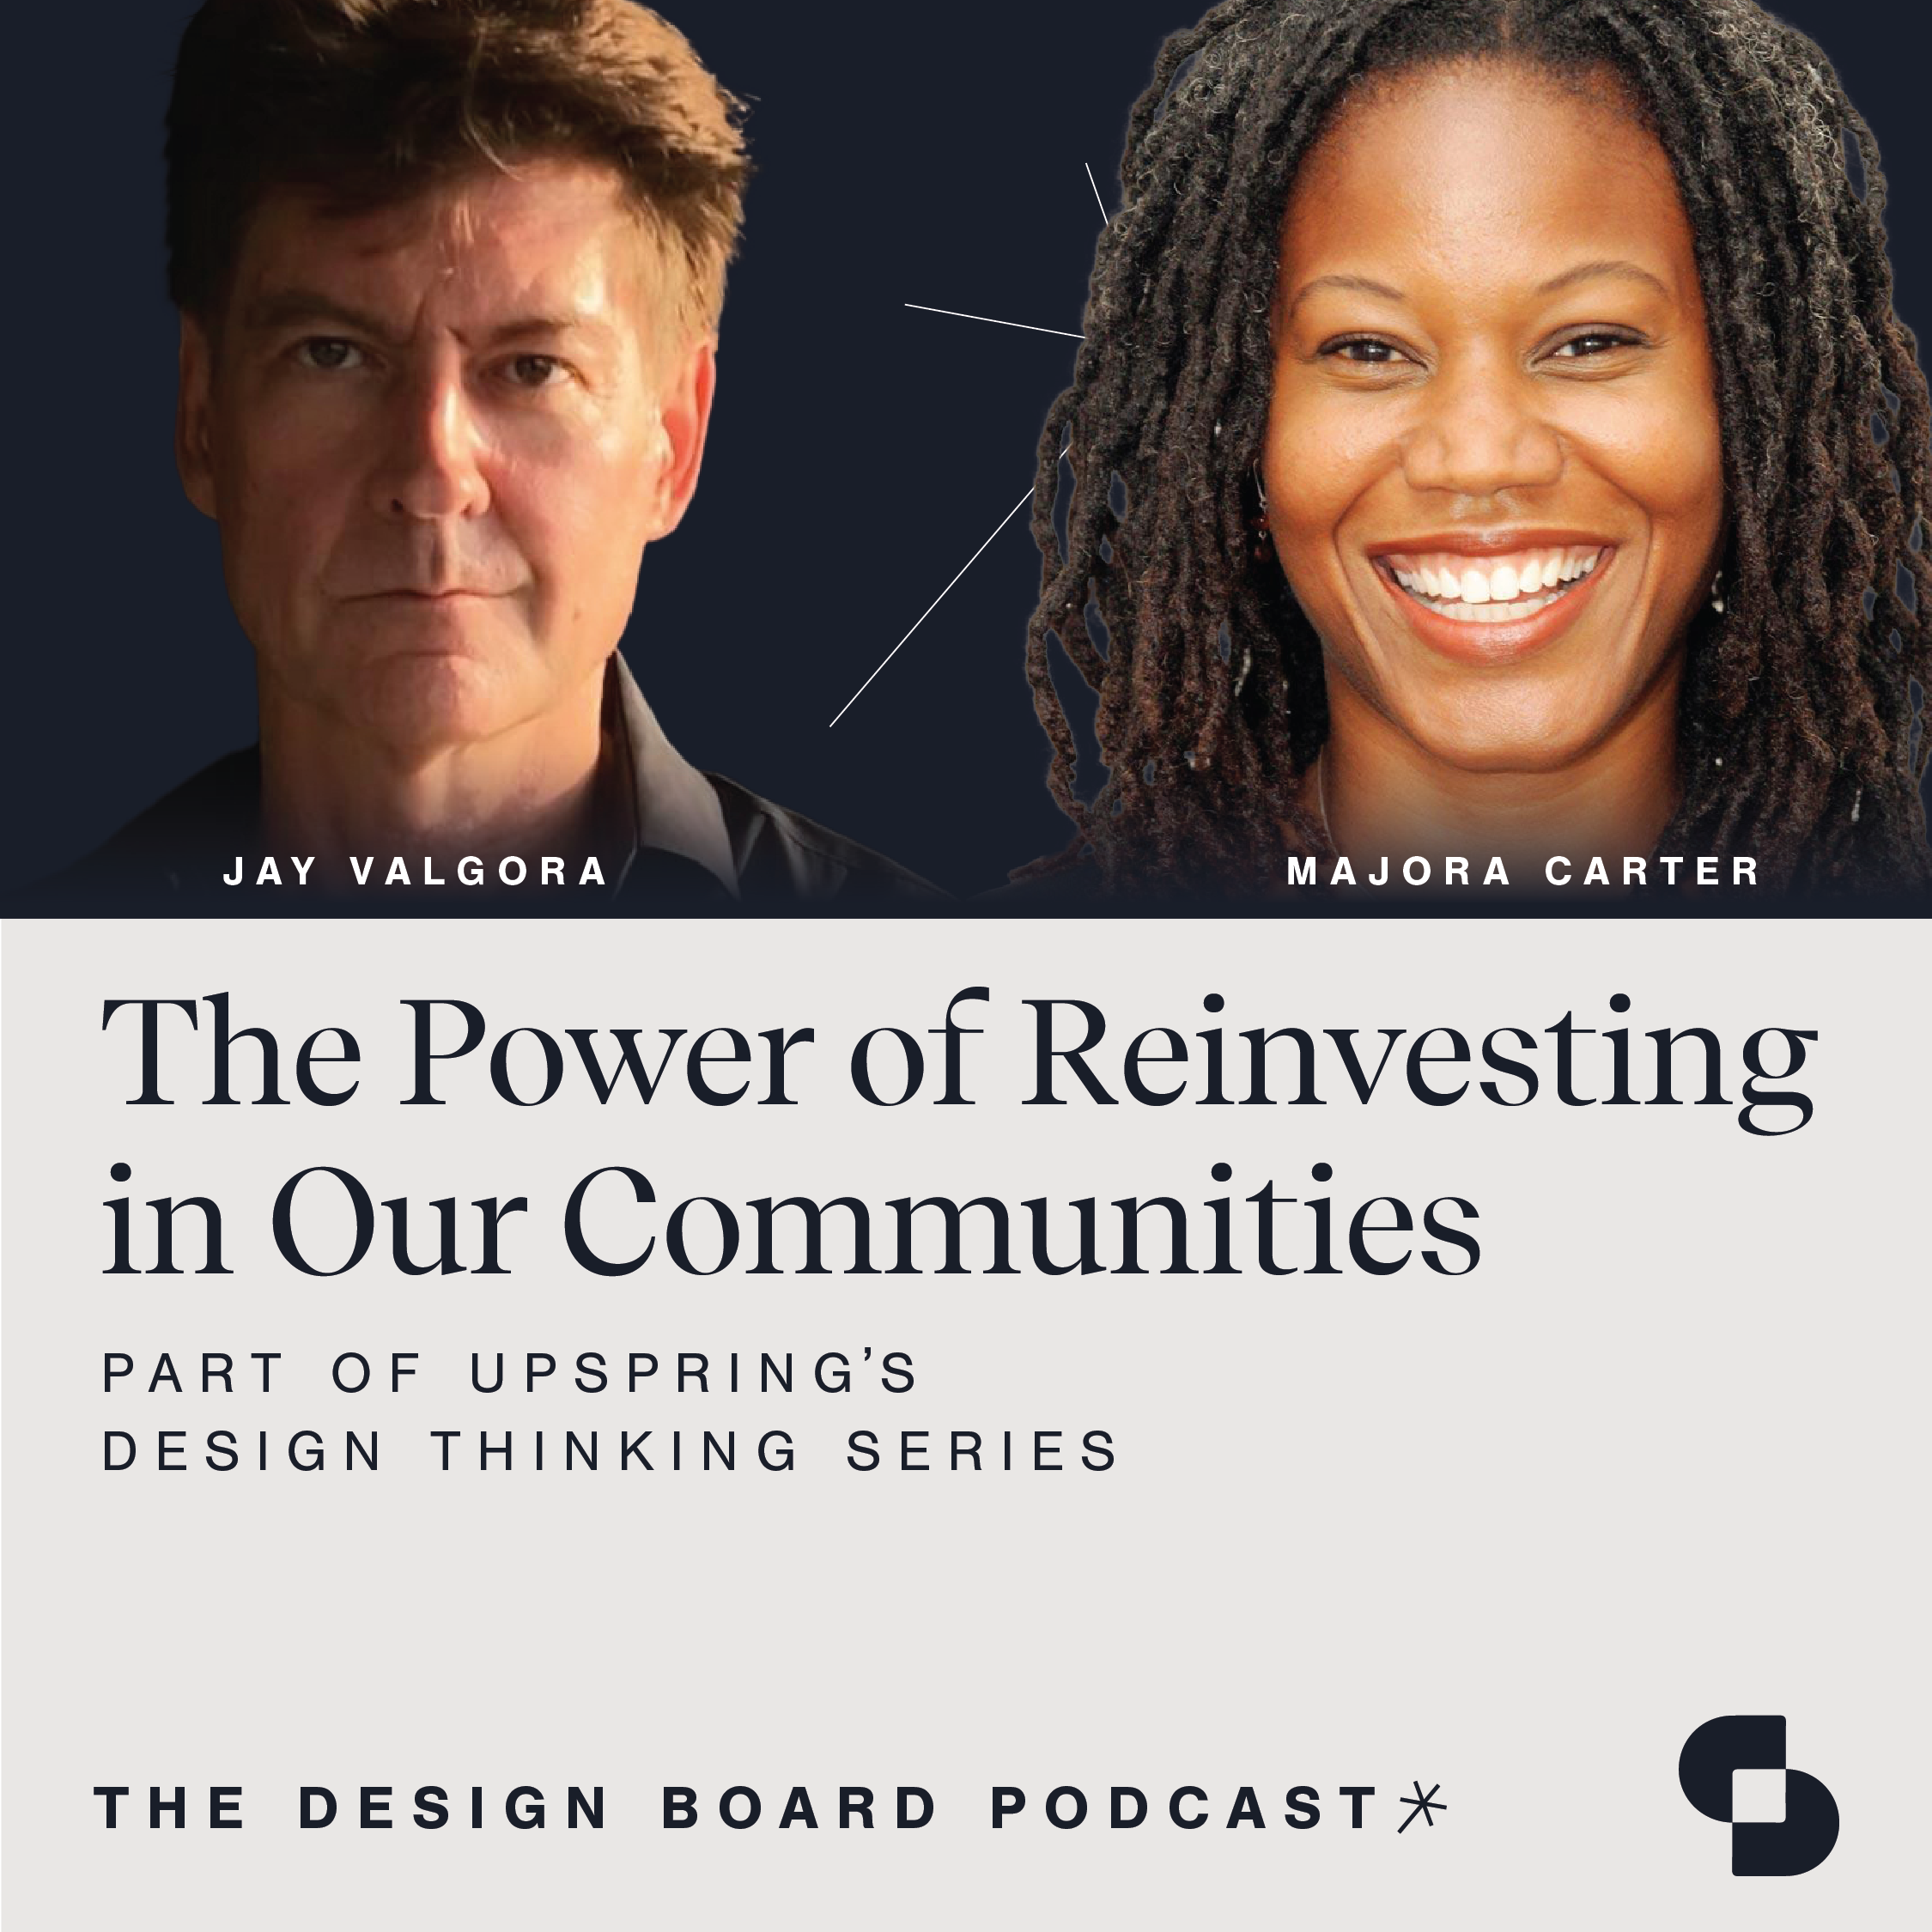 The Power of reinvesting in our communities episode cover art for The Design Board podcast